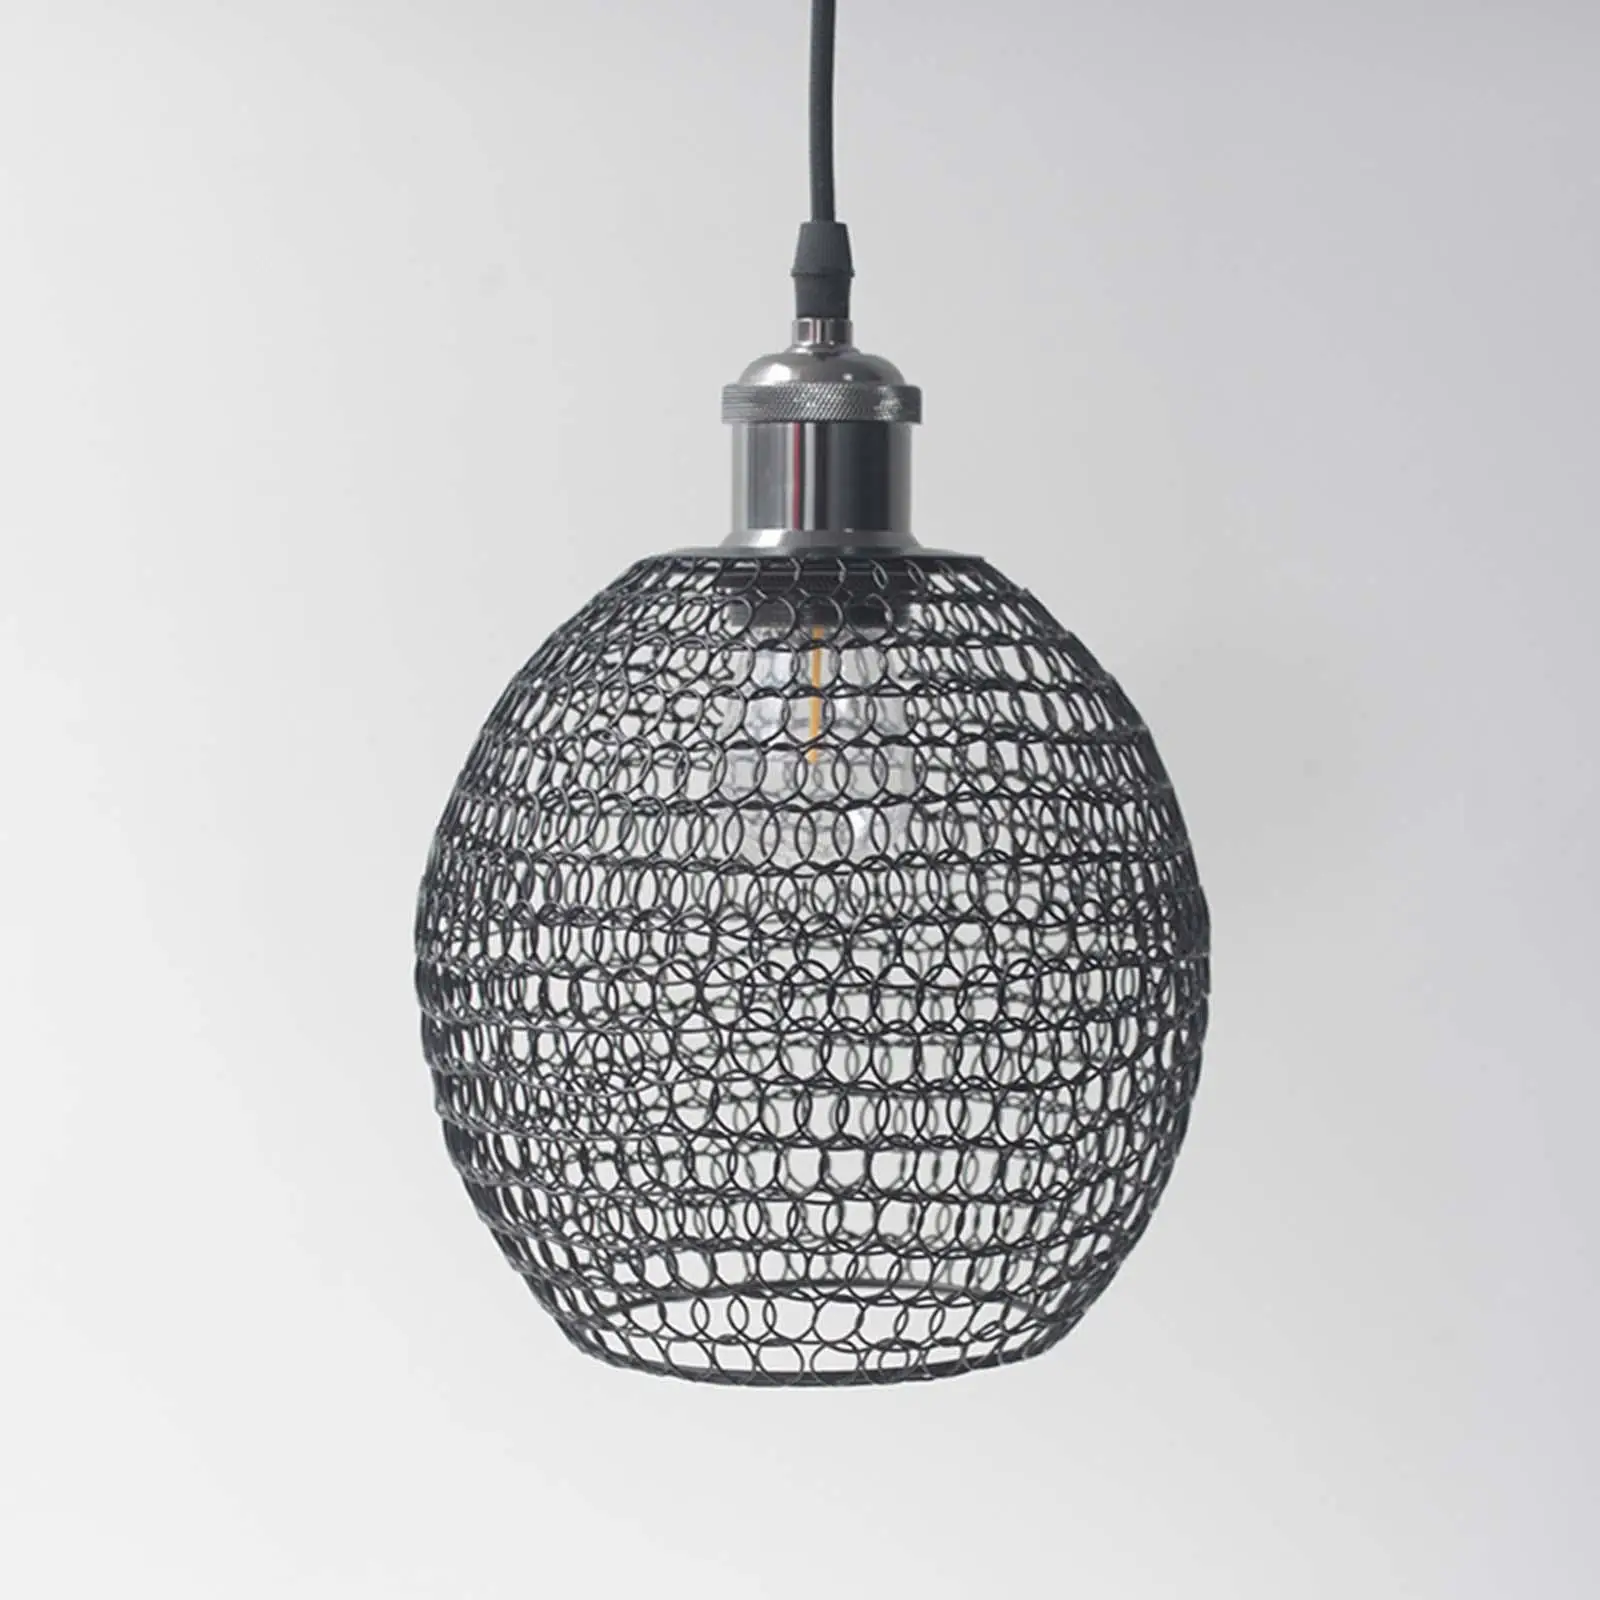 Mesh Lamp Shade Decoration Lighting Fixtures Lamp Guard Pendant Light Cage for Hotel Kitchen Bedroom Coffee Shop Dining Room